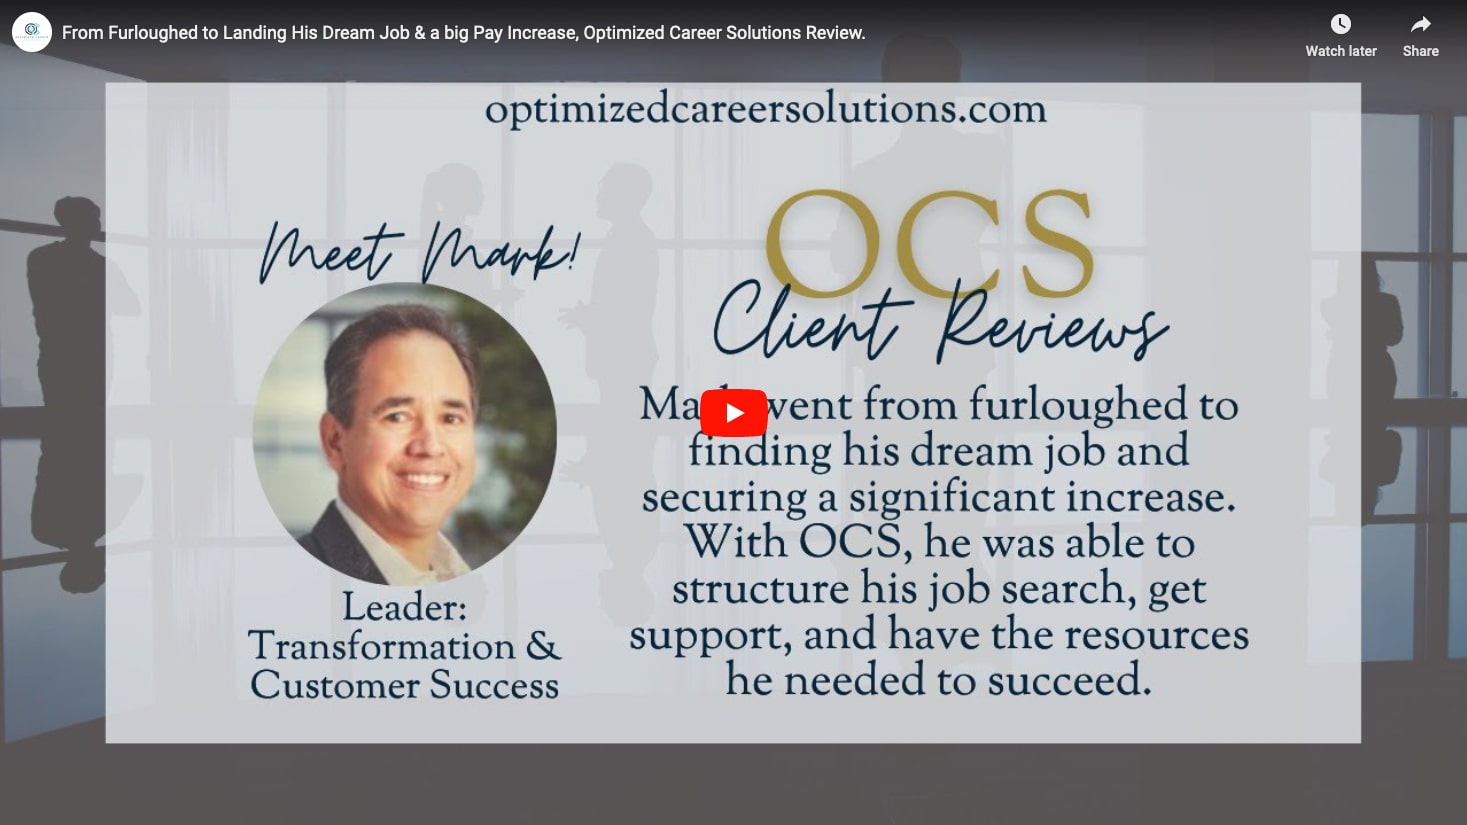 From Furloughed to Landing His Dream Job & a big Pay Increase, Optimized Career Solutions Review.